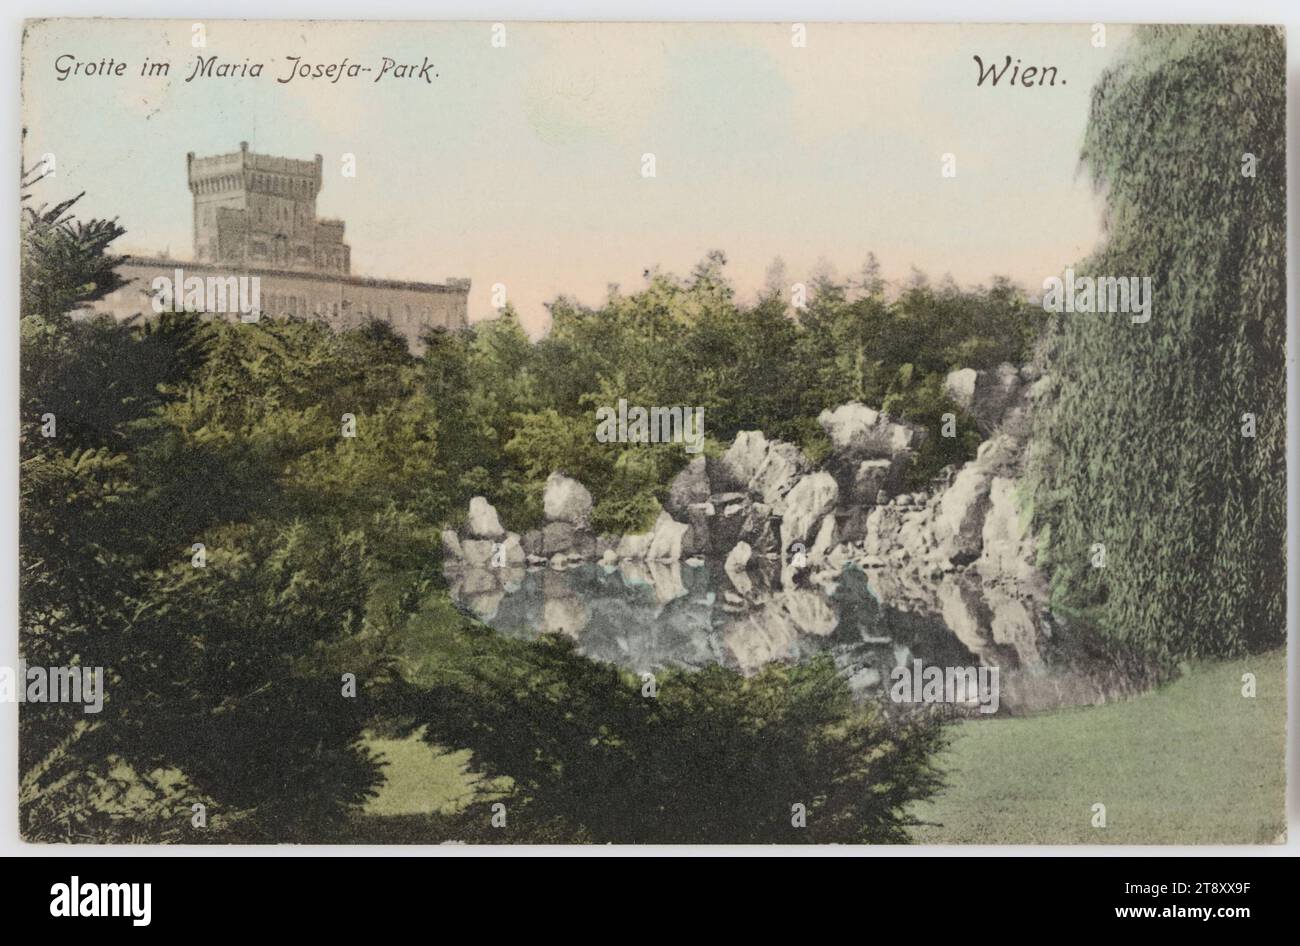 3rd, Schweizergarten (formerly Maria-Josefa-Park) - view towards Arsenal, picture postcard, Carl (Karl) Ledermann jun., Producer, 1907, paperboard, hand colorised, Collotype, Inscription, FROM, Wien, TO, Wien, ADDRESS, Wohlgeboren Frau Stadtbaumeister Wien VIII. Landongasse 42, MESSAGE, Dearest Mina! I am sorry that I have not yet returned your dear visit! But last Wednesday the weather was so miserable that the children were not allowed to go out. We hope to see you and the dear little ones next Wednesday, and until then I remain your friend, who sends you her warmest regards, Military Stock Photo